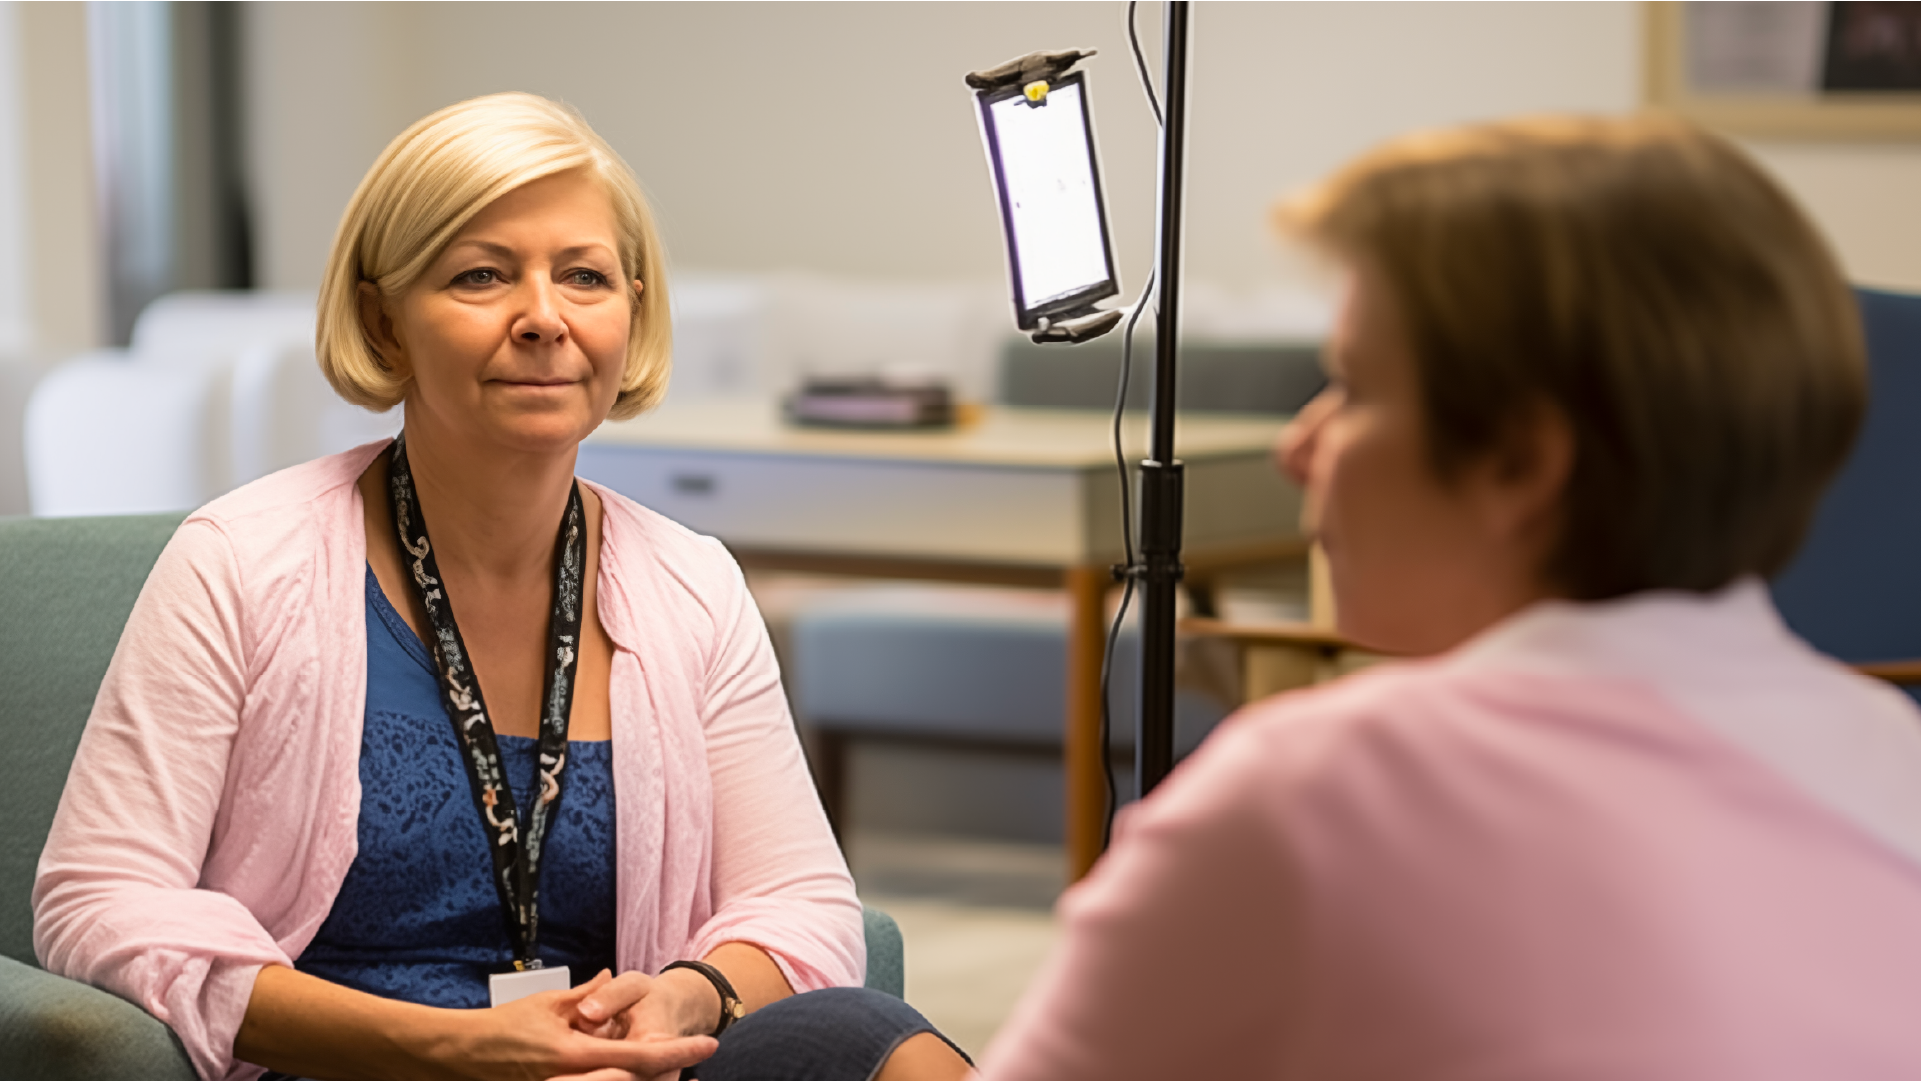 Study on the experiences of cancer survivors, researchers may conduct narrative analysis on interviews with survivors.